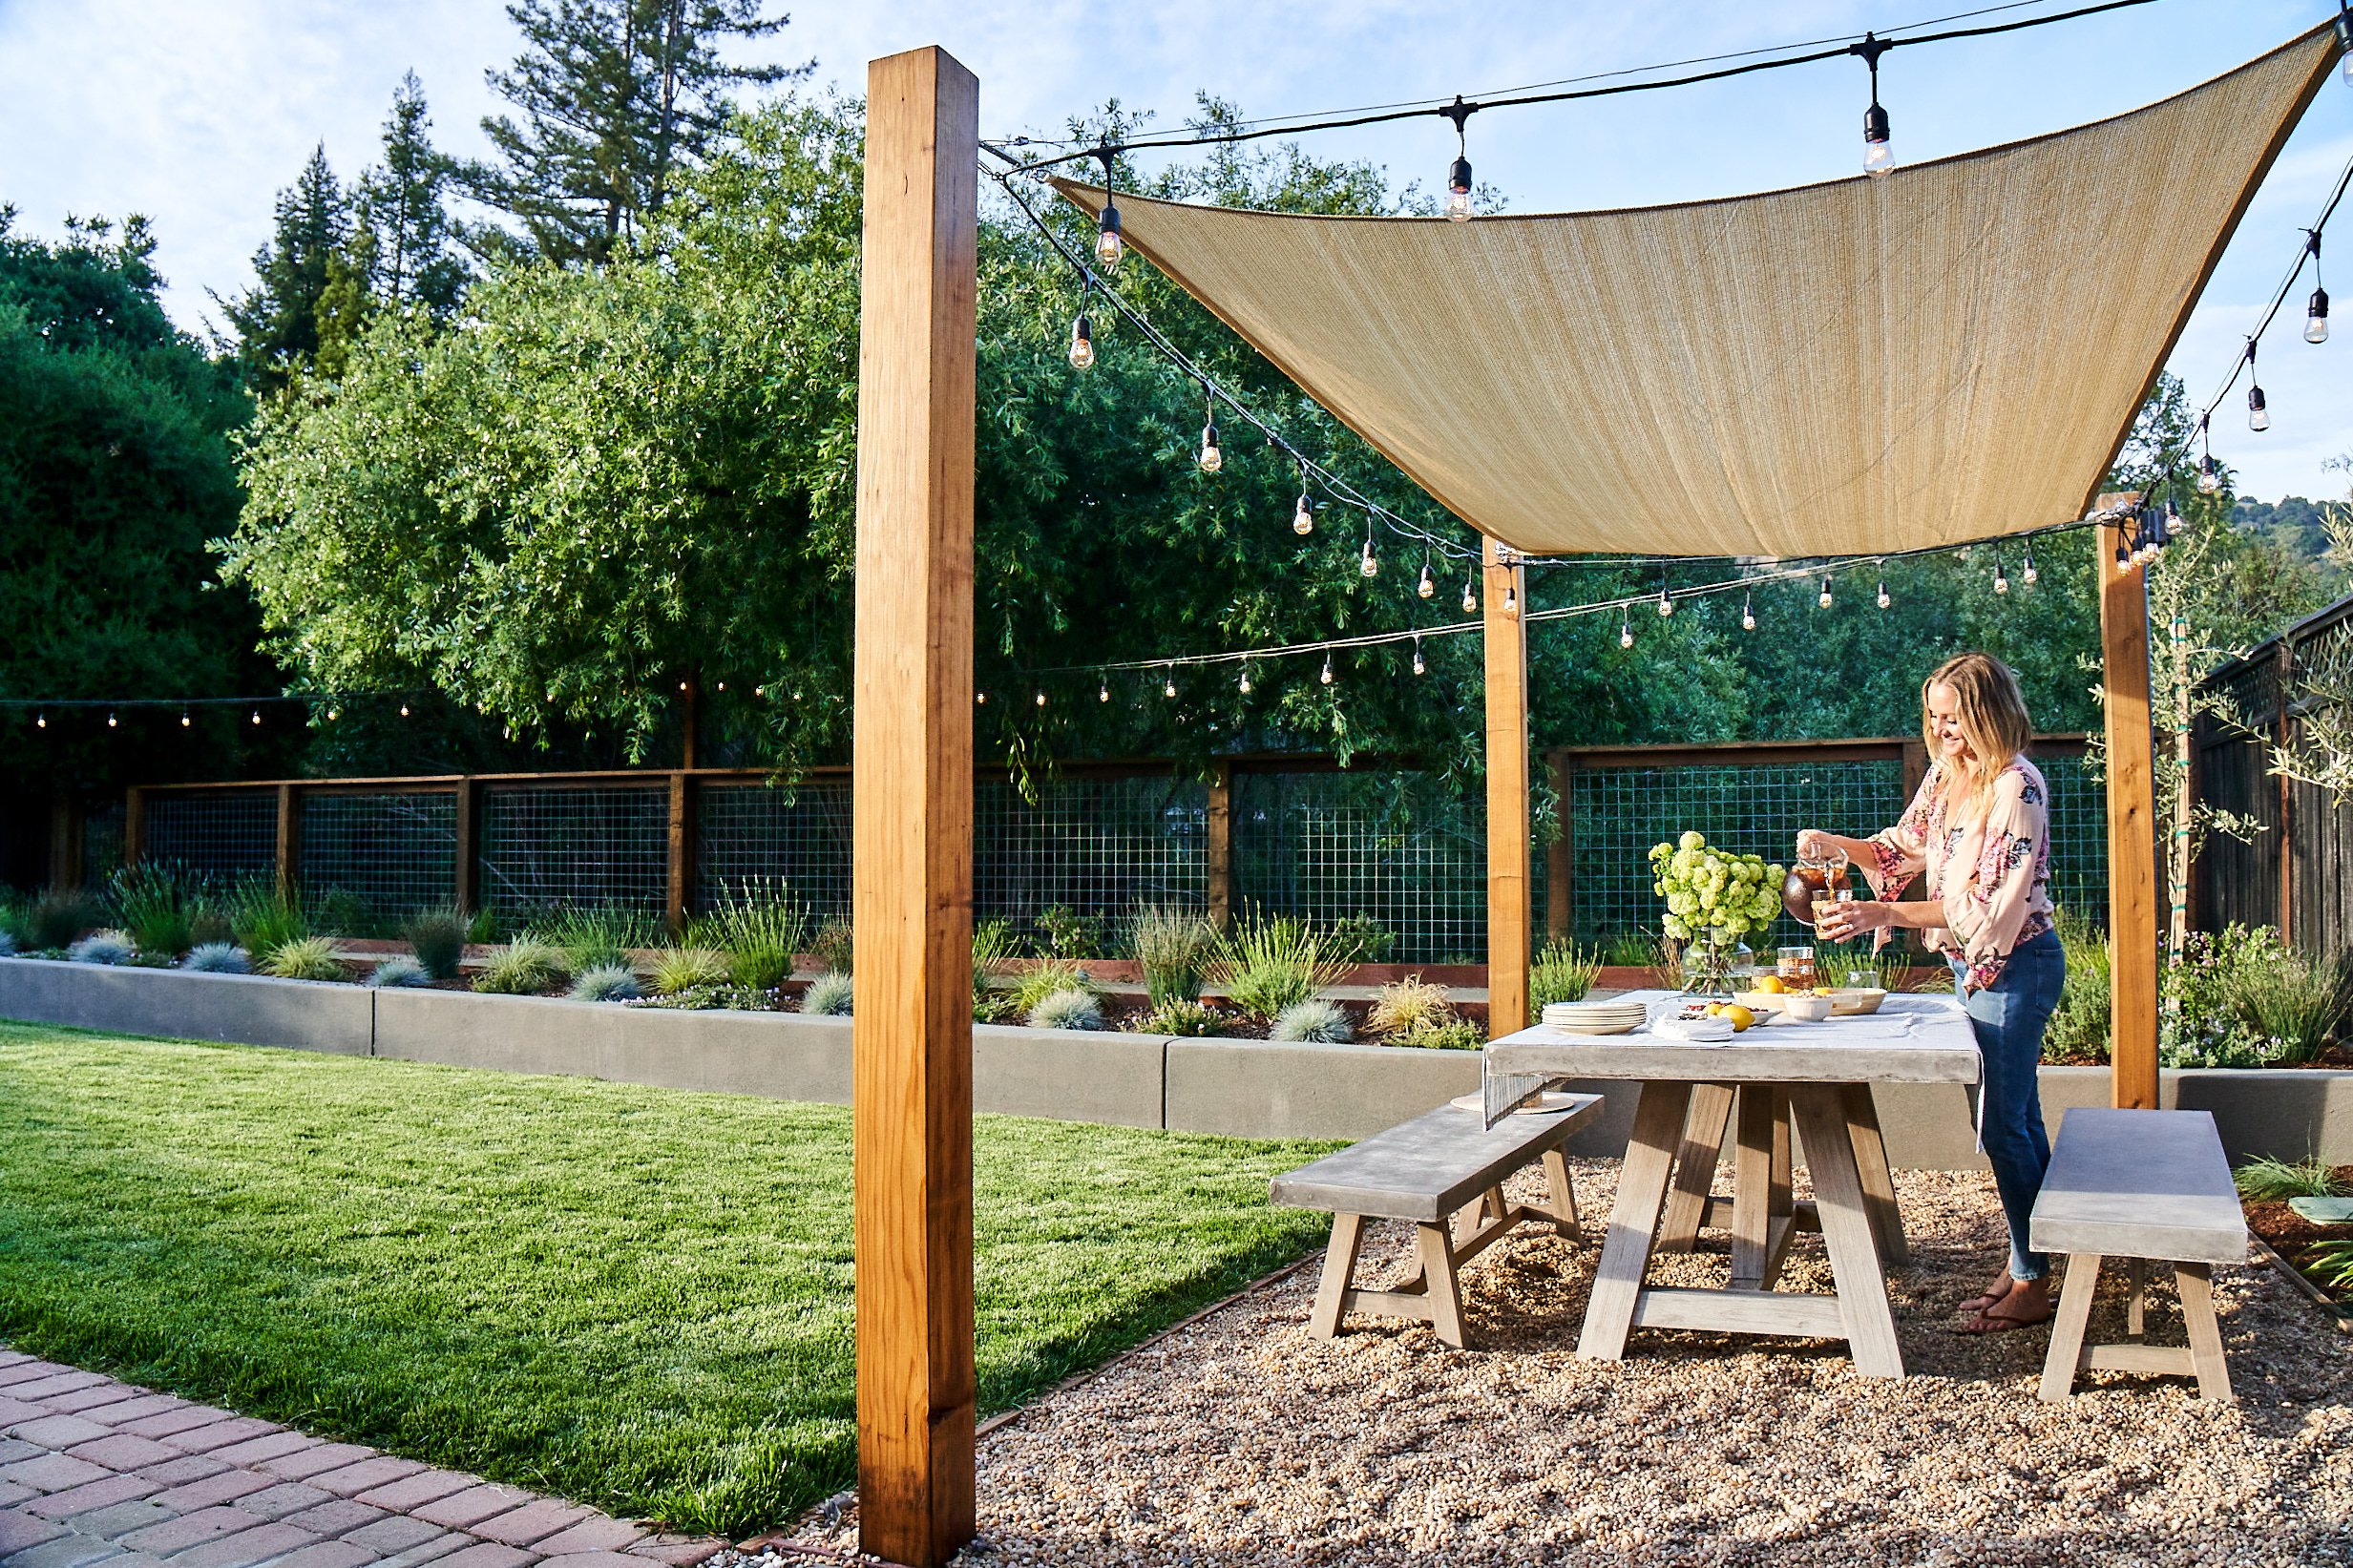 gravel dining area with four posts supporting a shade sail above